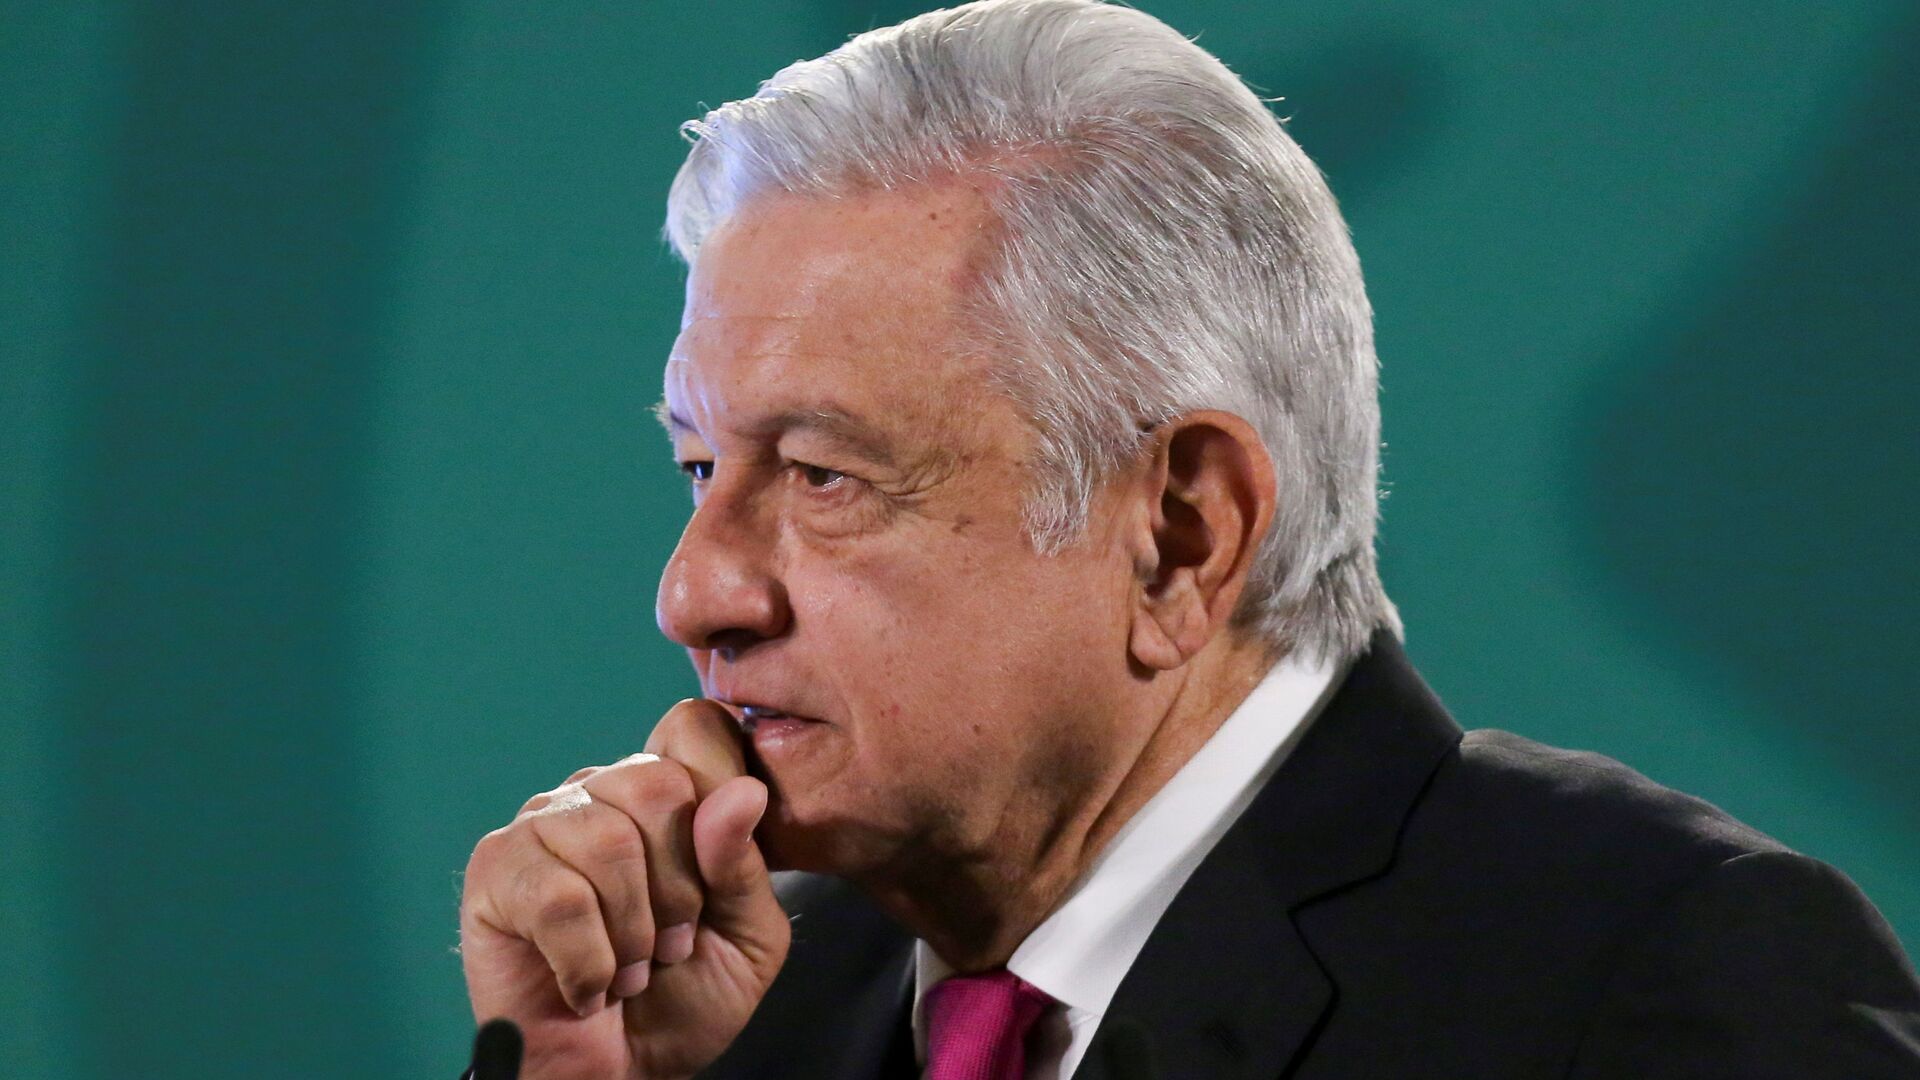 Mexico's President Andres Manuel Lopez Obrador gestures during a news conference at the National Palace in Mexico City - Sputnik Afrique, 1920, 04.12.2021